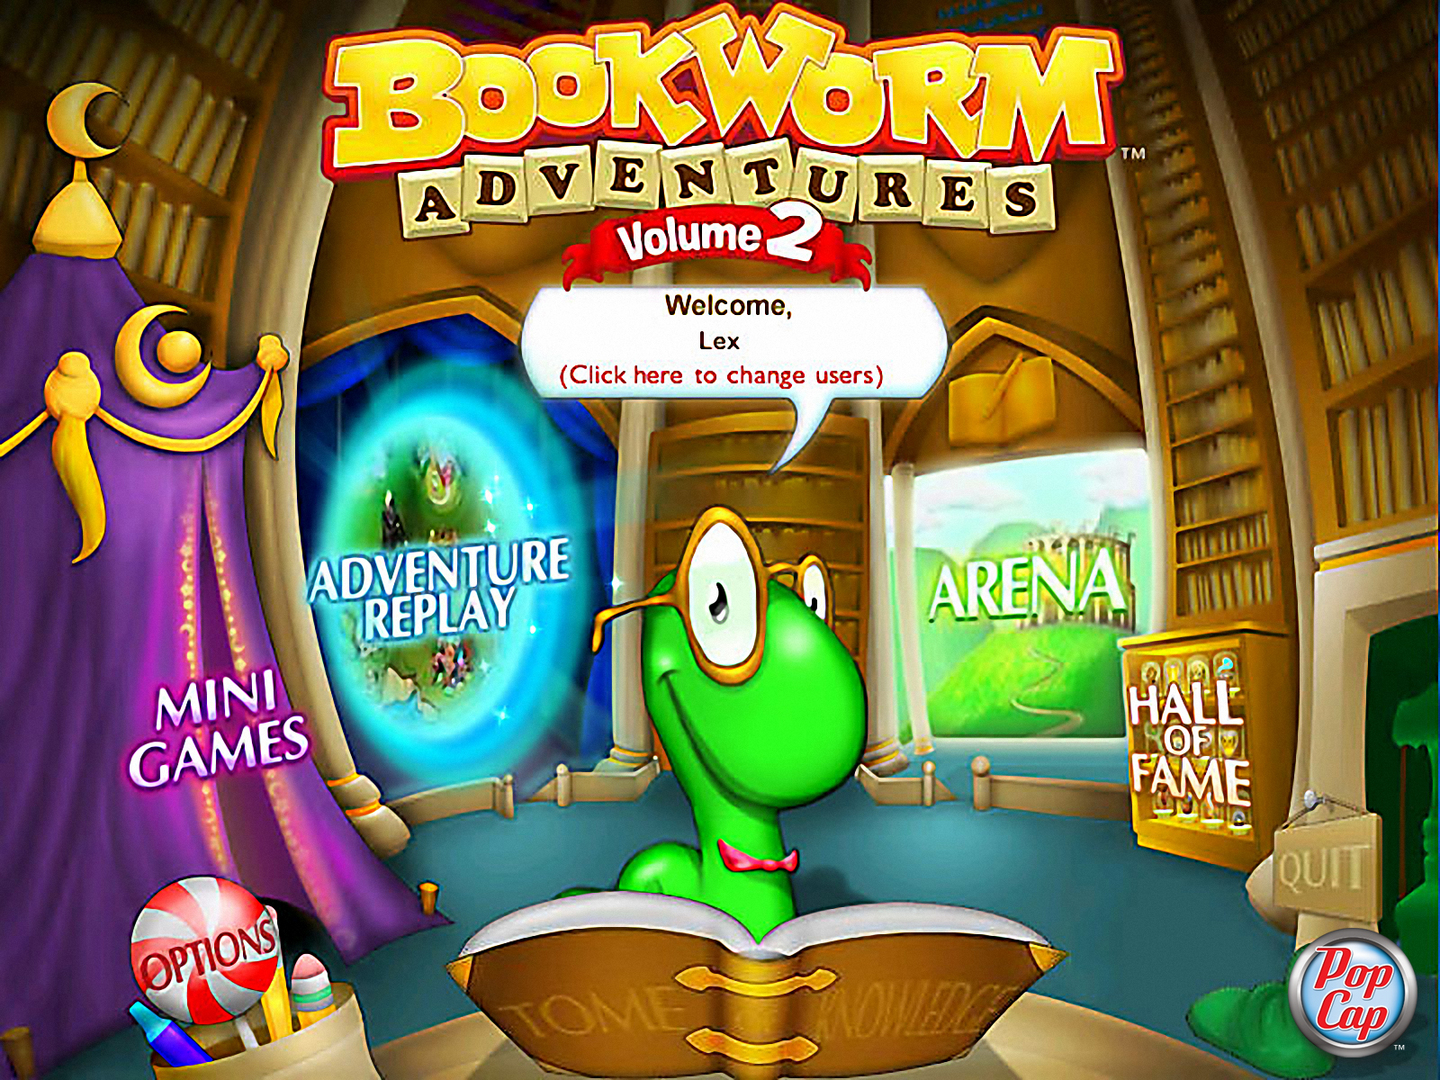 bookworm deluxe for android